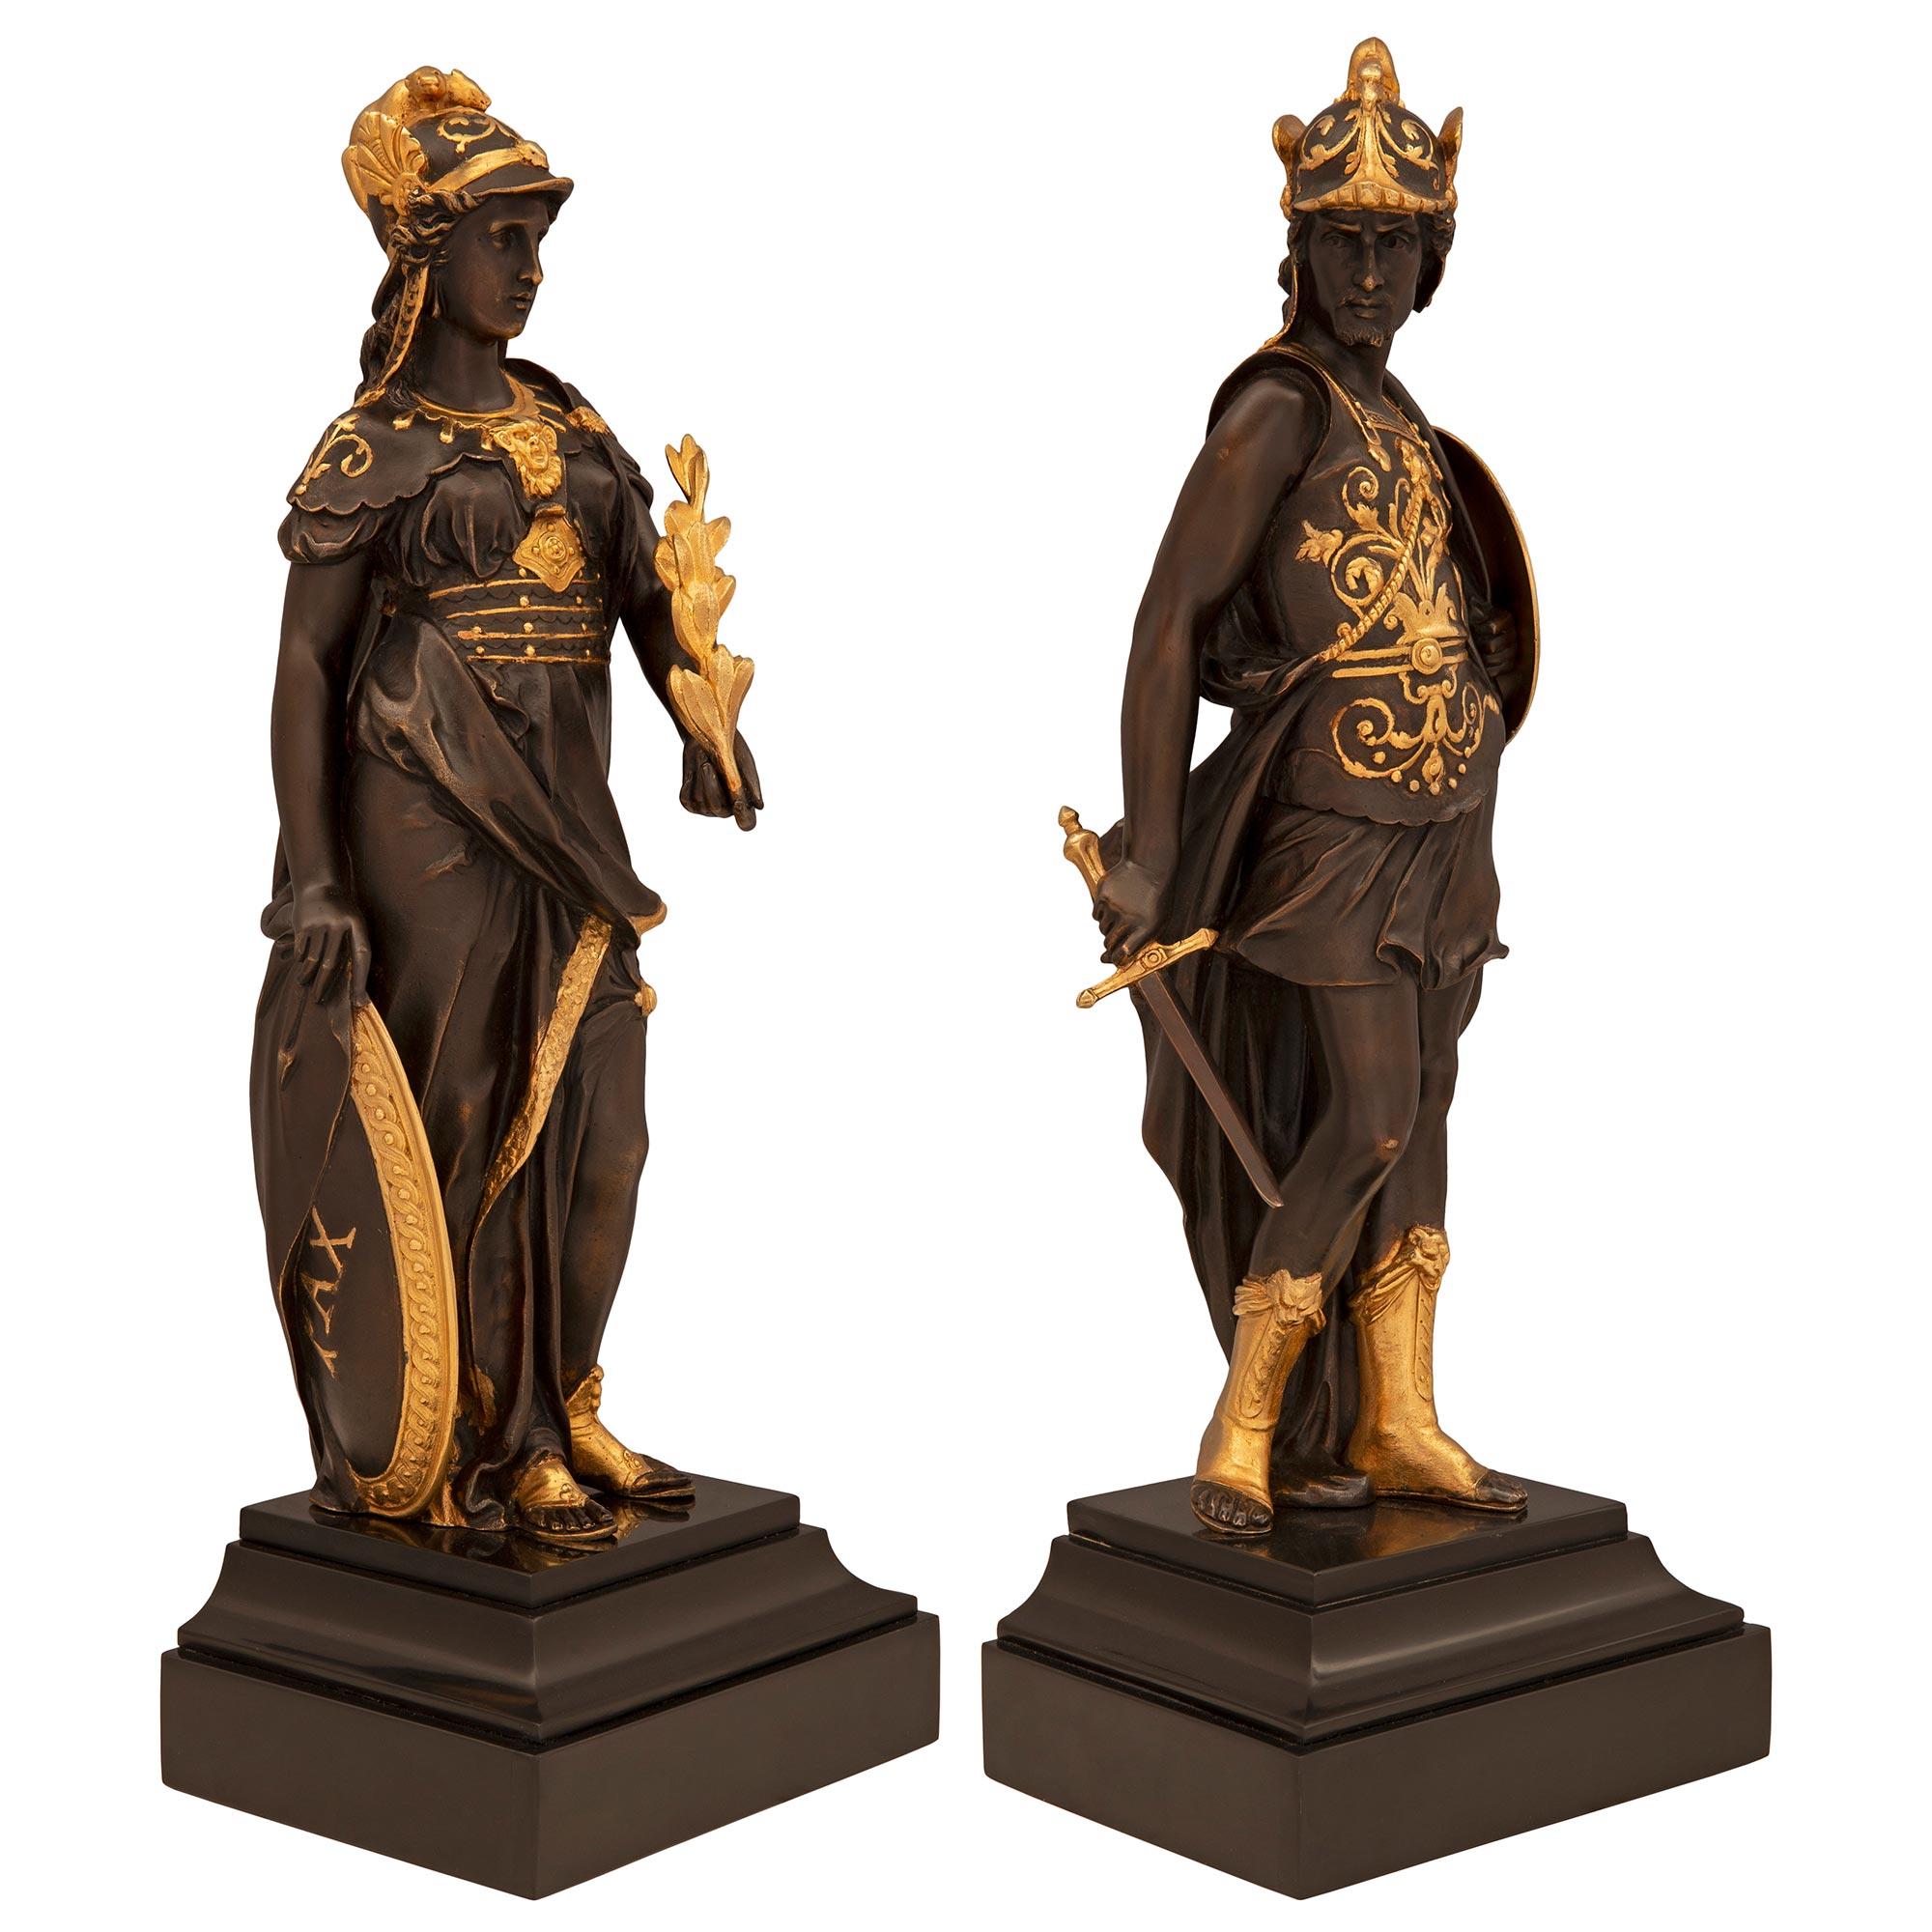 A striking and high quality true pair of French 19th century Renaissance st. patinated bronze, ormolu, and black Belgian marble statues of Hermes and Minerva. Each statue is raised by impressive square black Belgian marble bases with an elegant